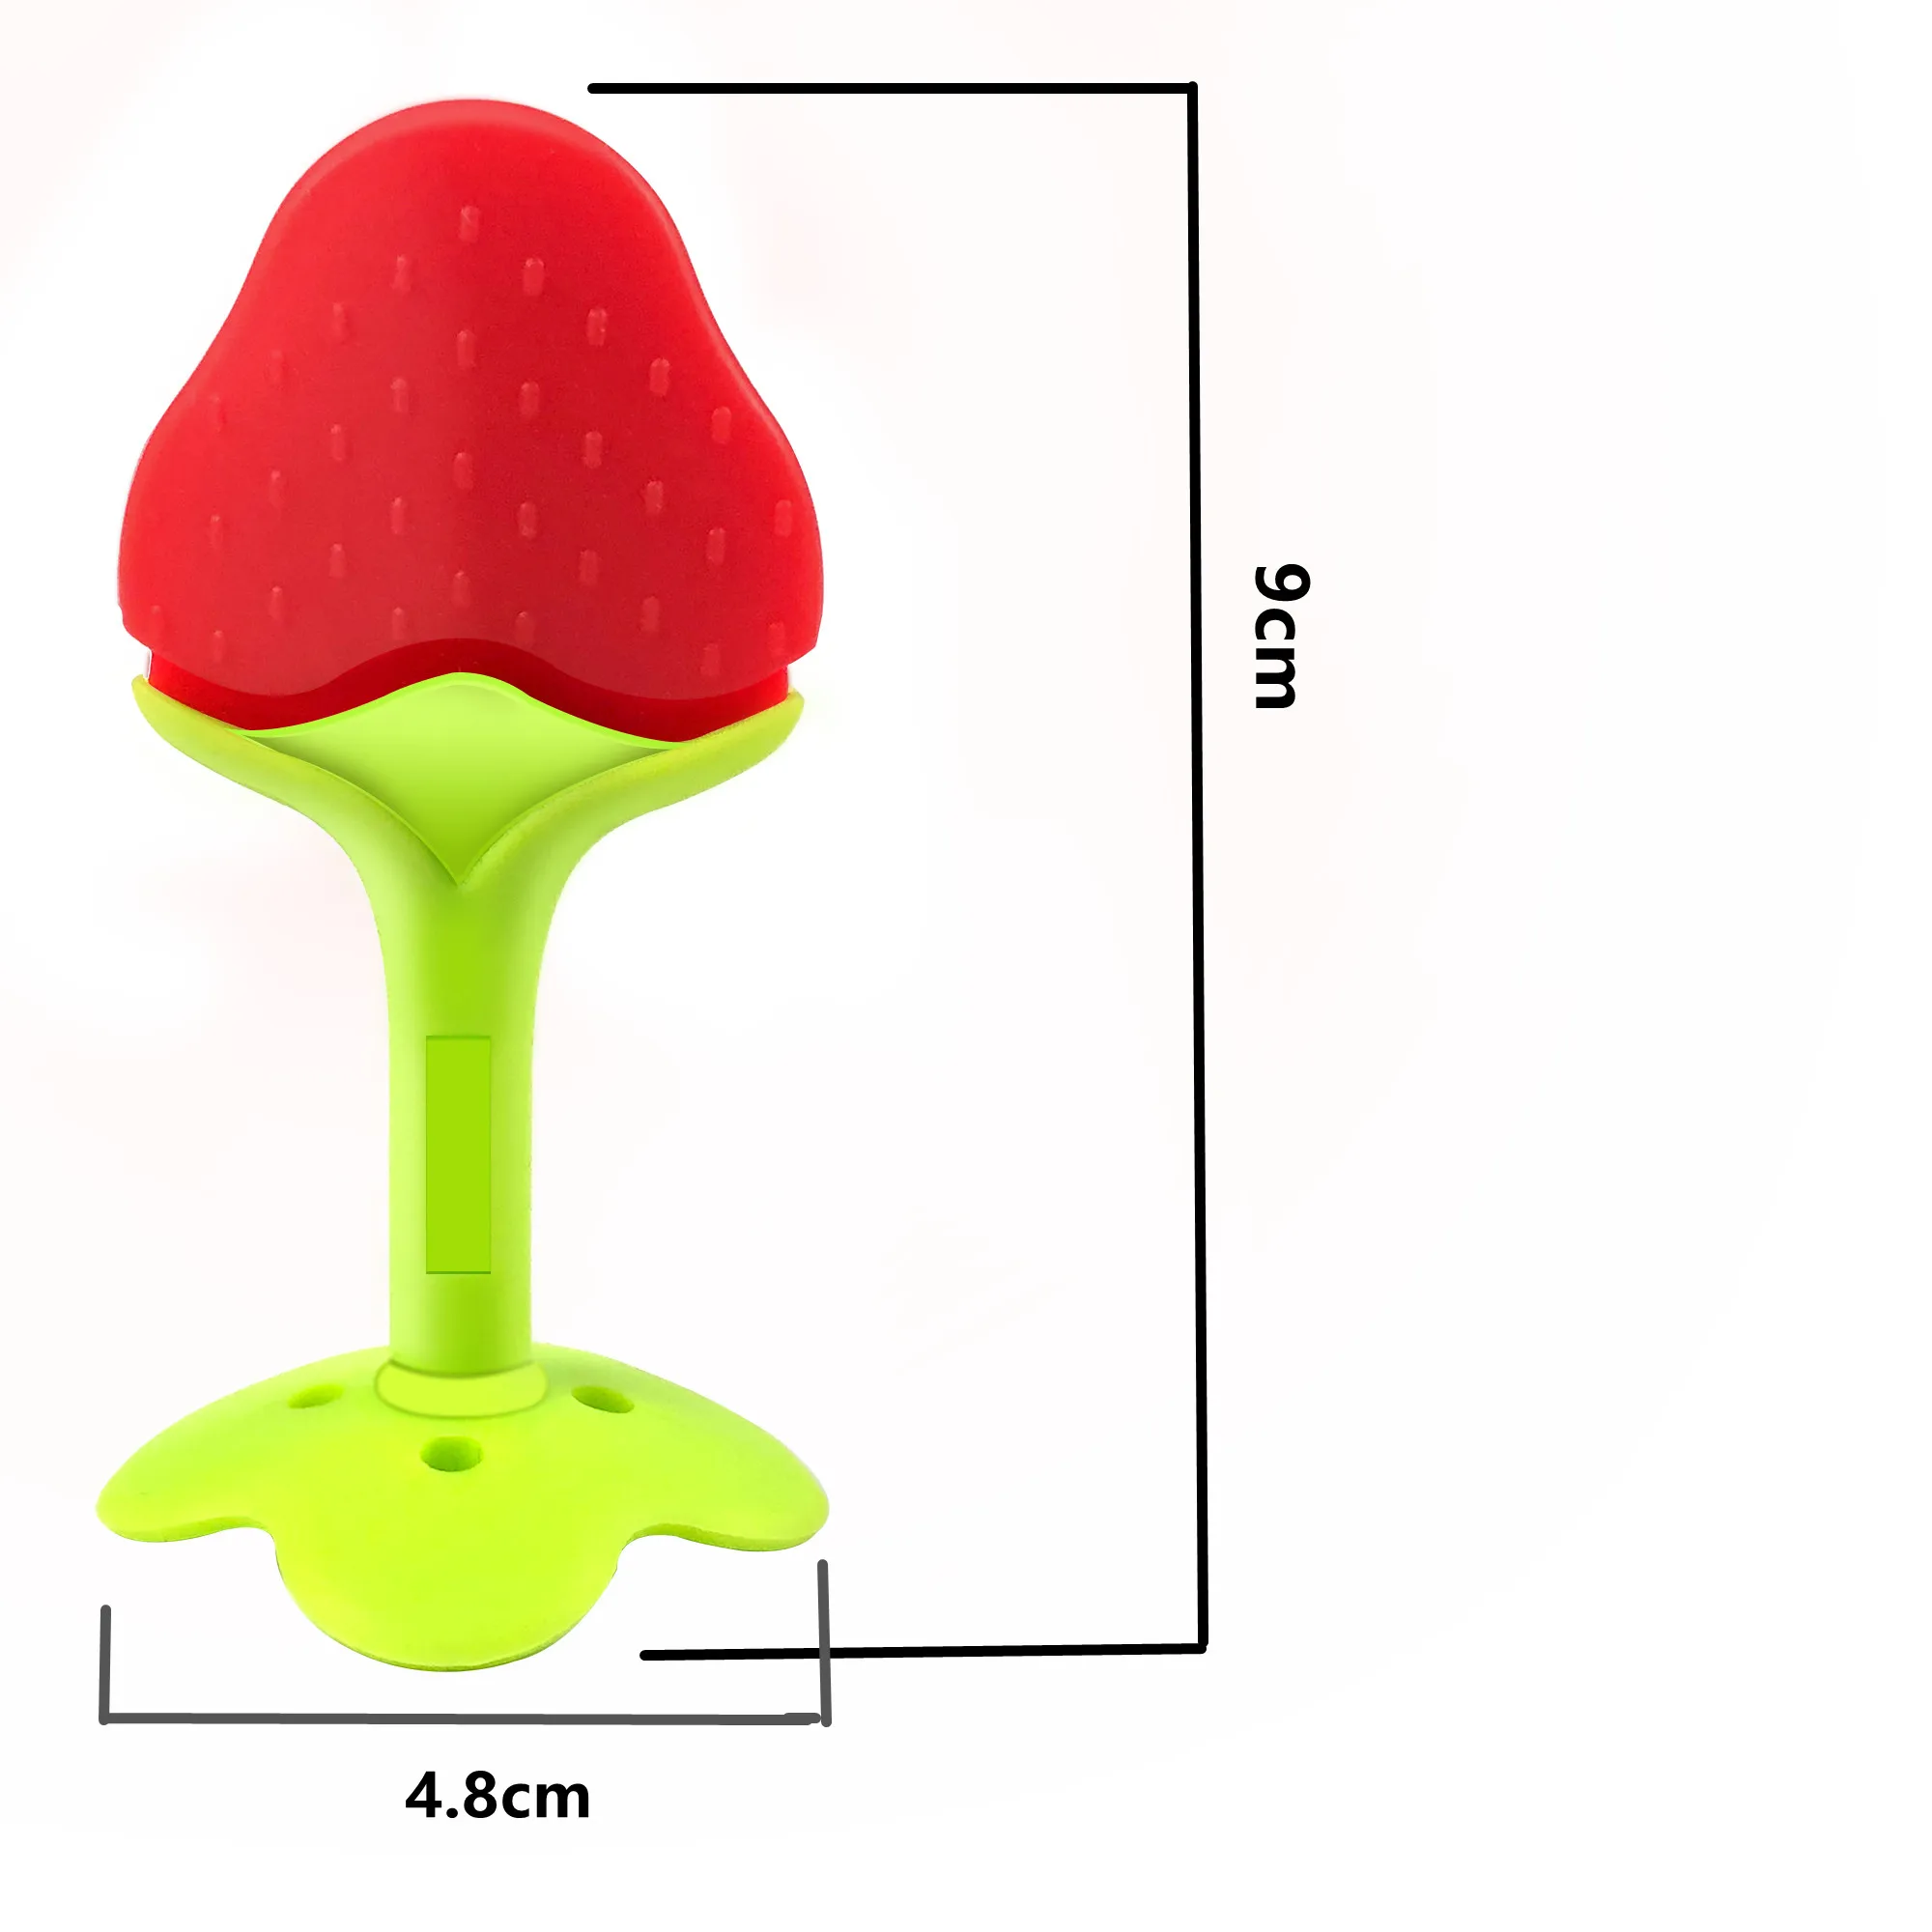 Fruit shape safe baby soft silicone material kids toy mini teether